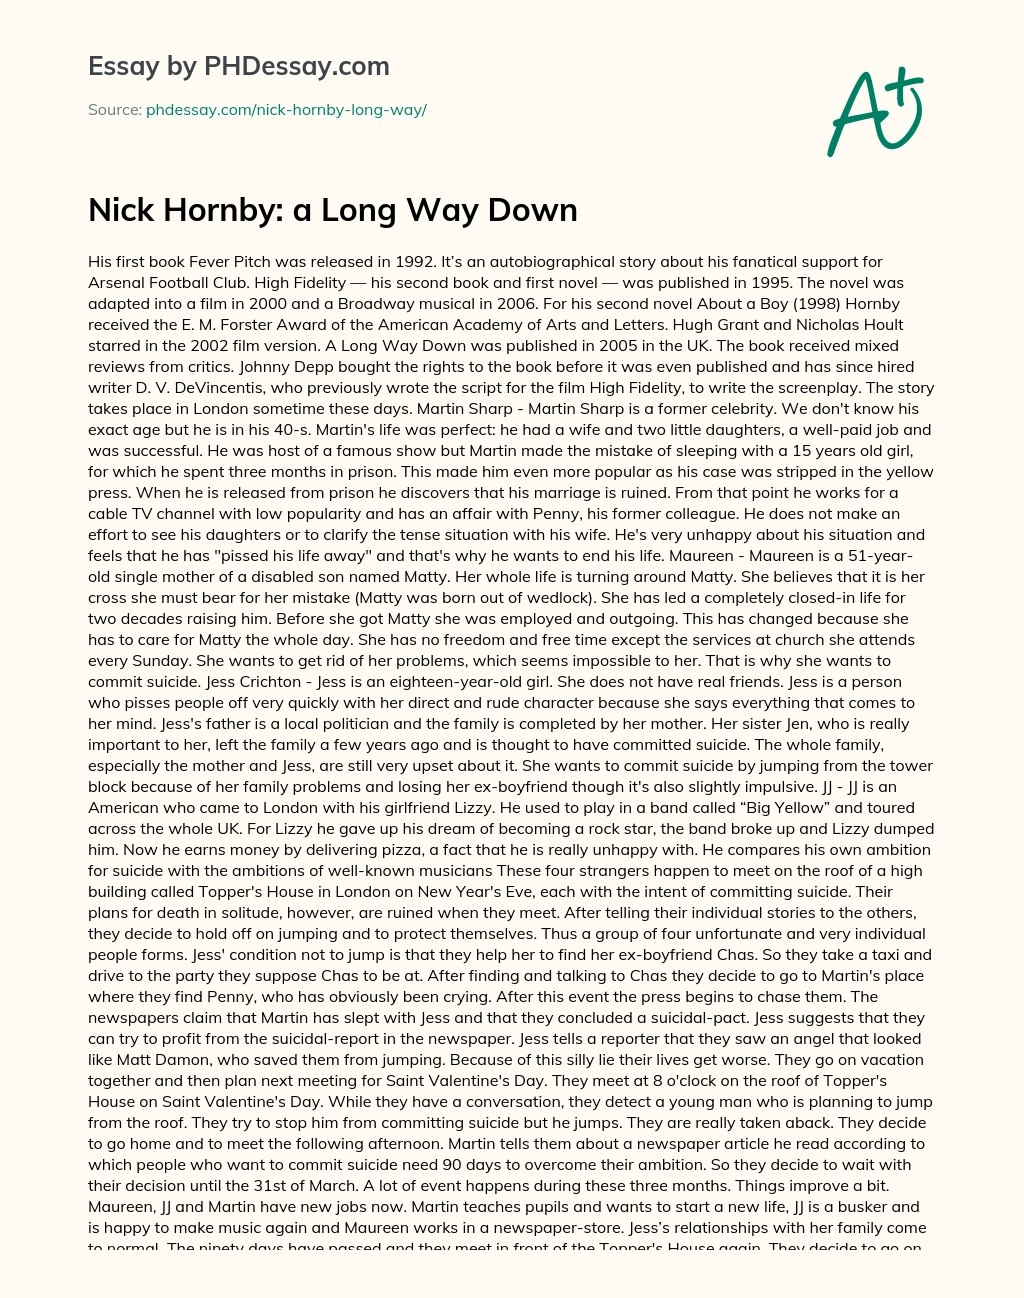 Nick Hornby: a Long Way Down essay